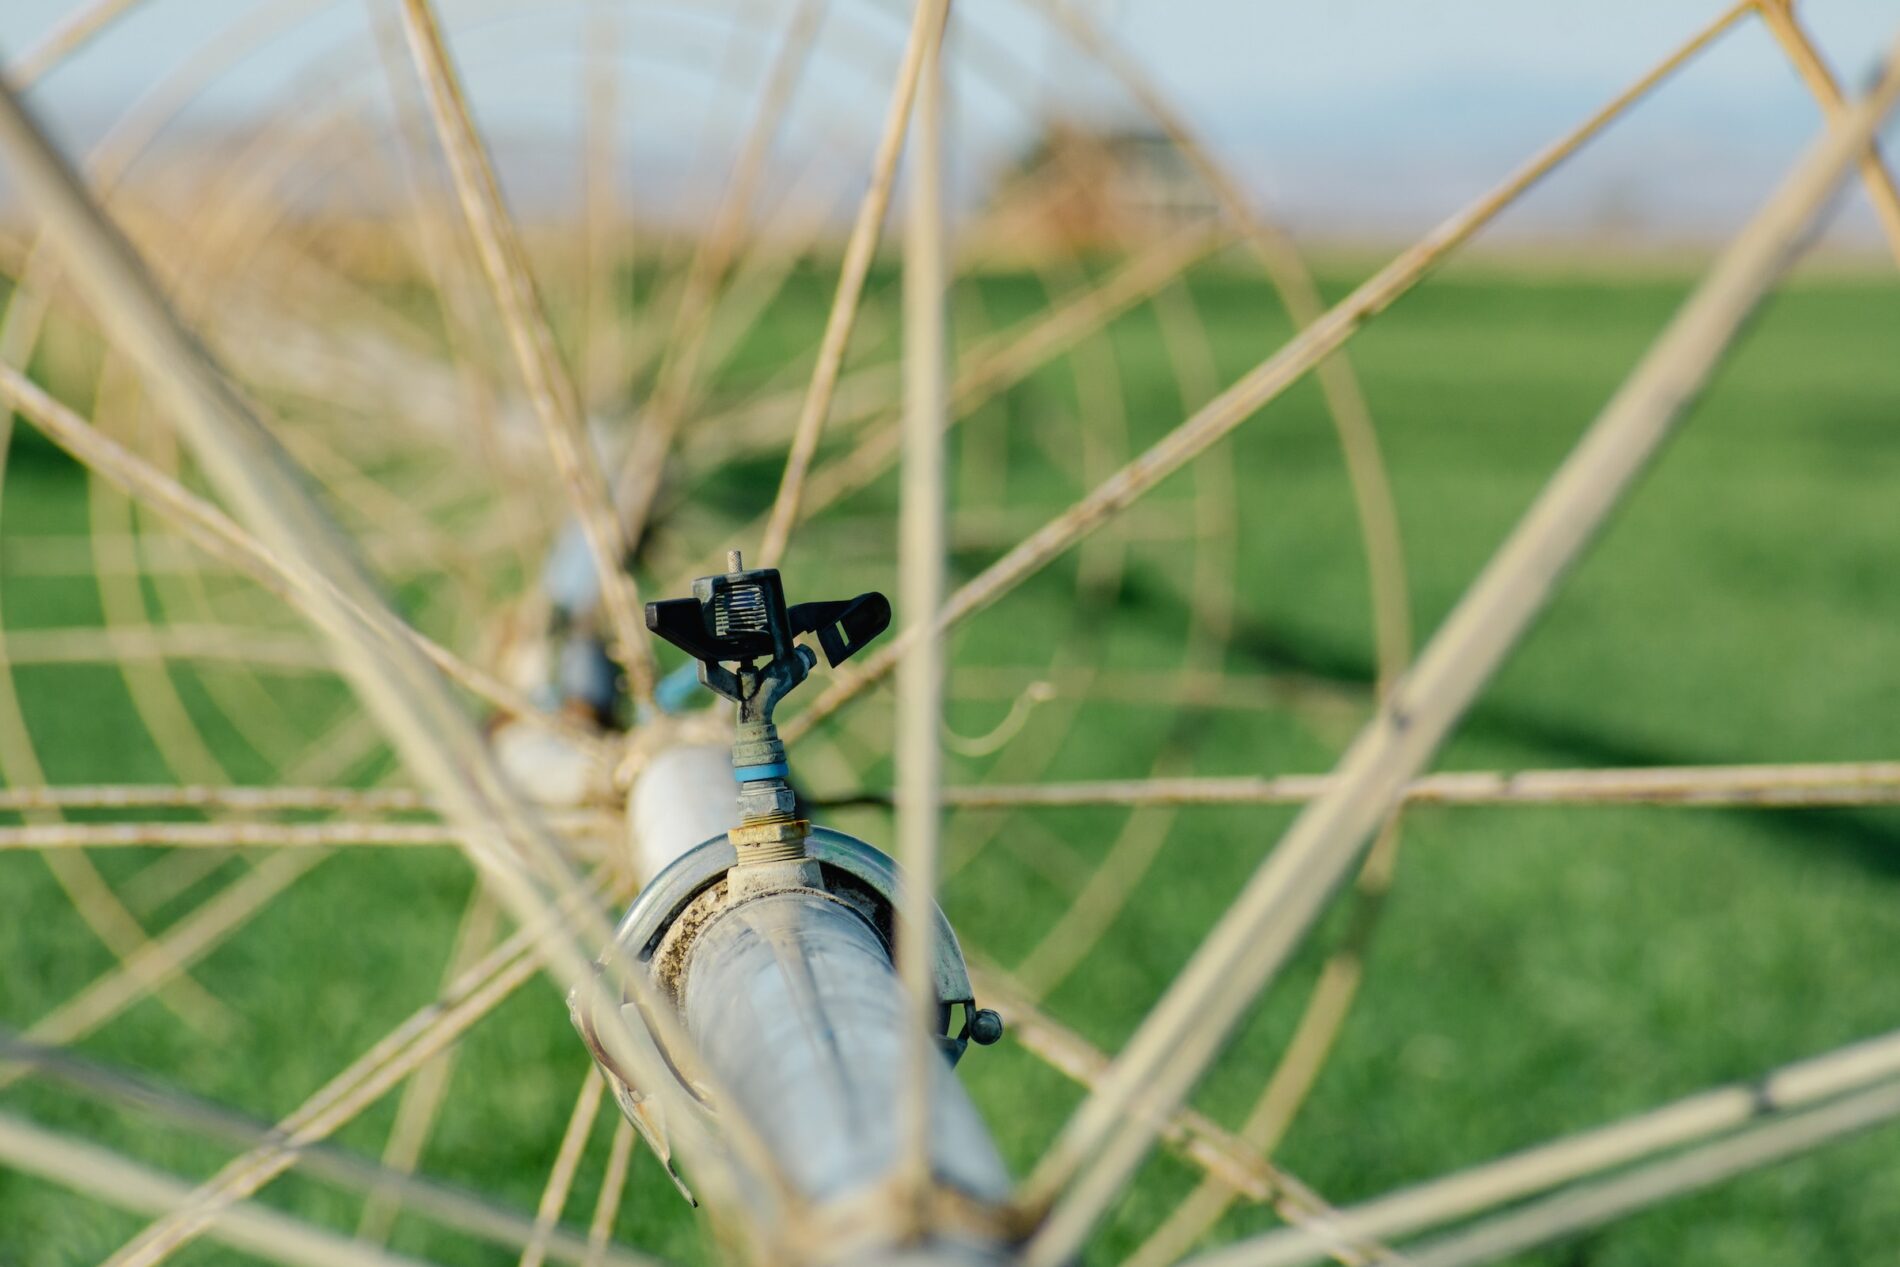 A close up of a water pipe in a furrow irrigation field.